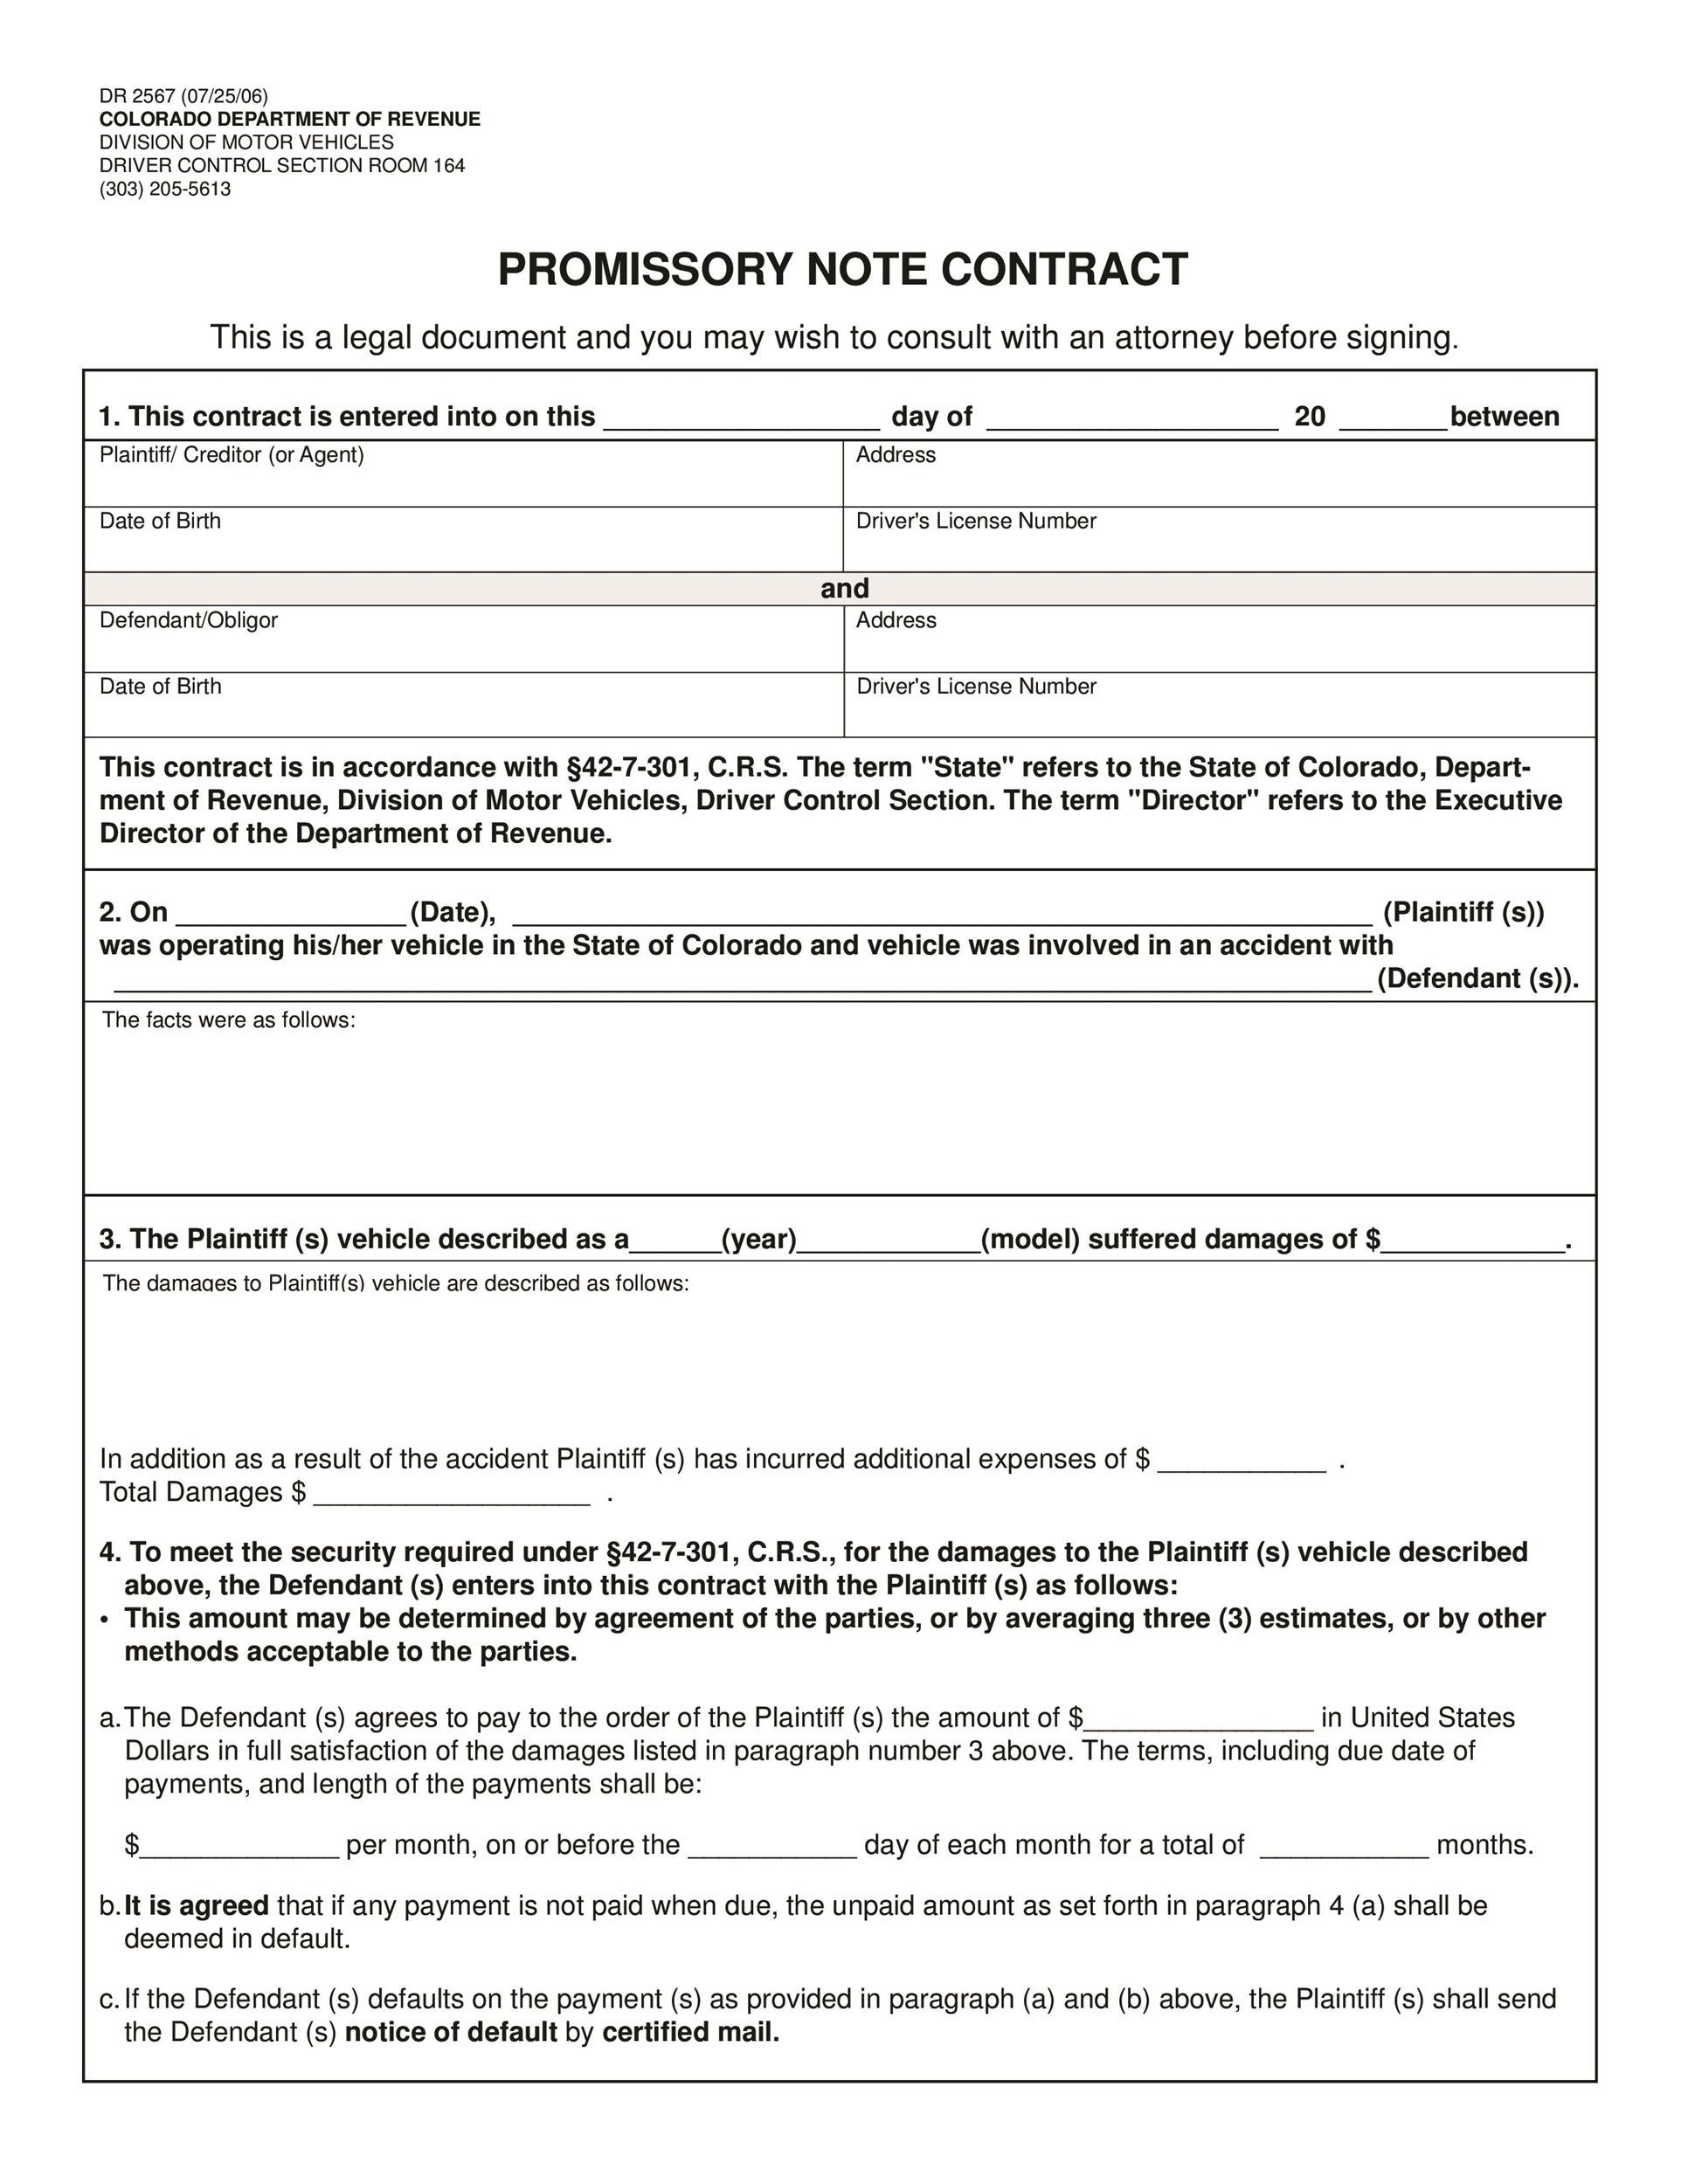 Free promissory note template 07